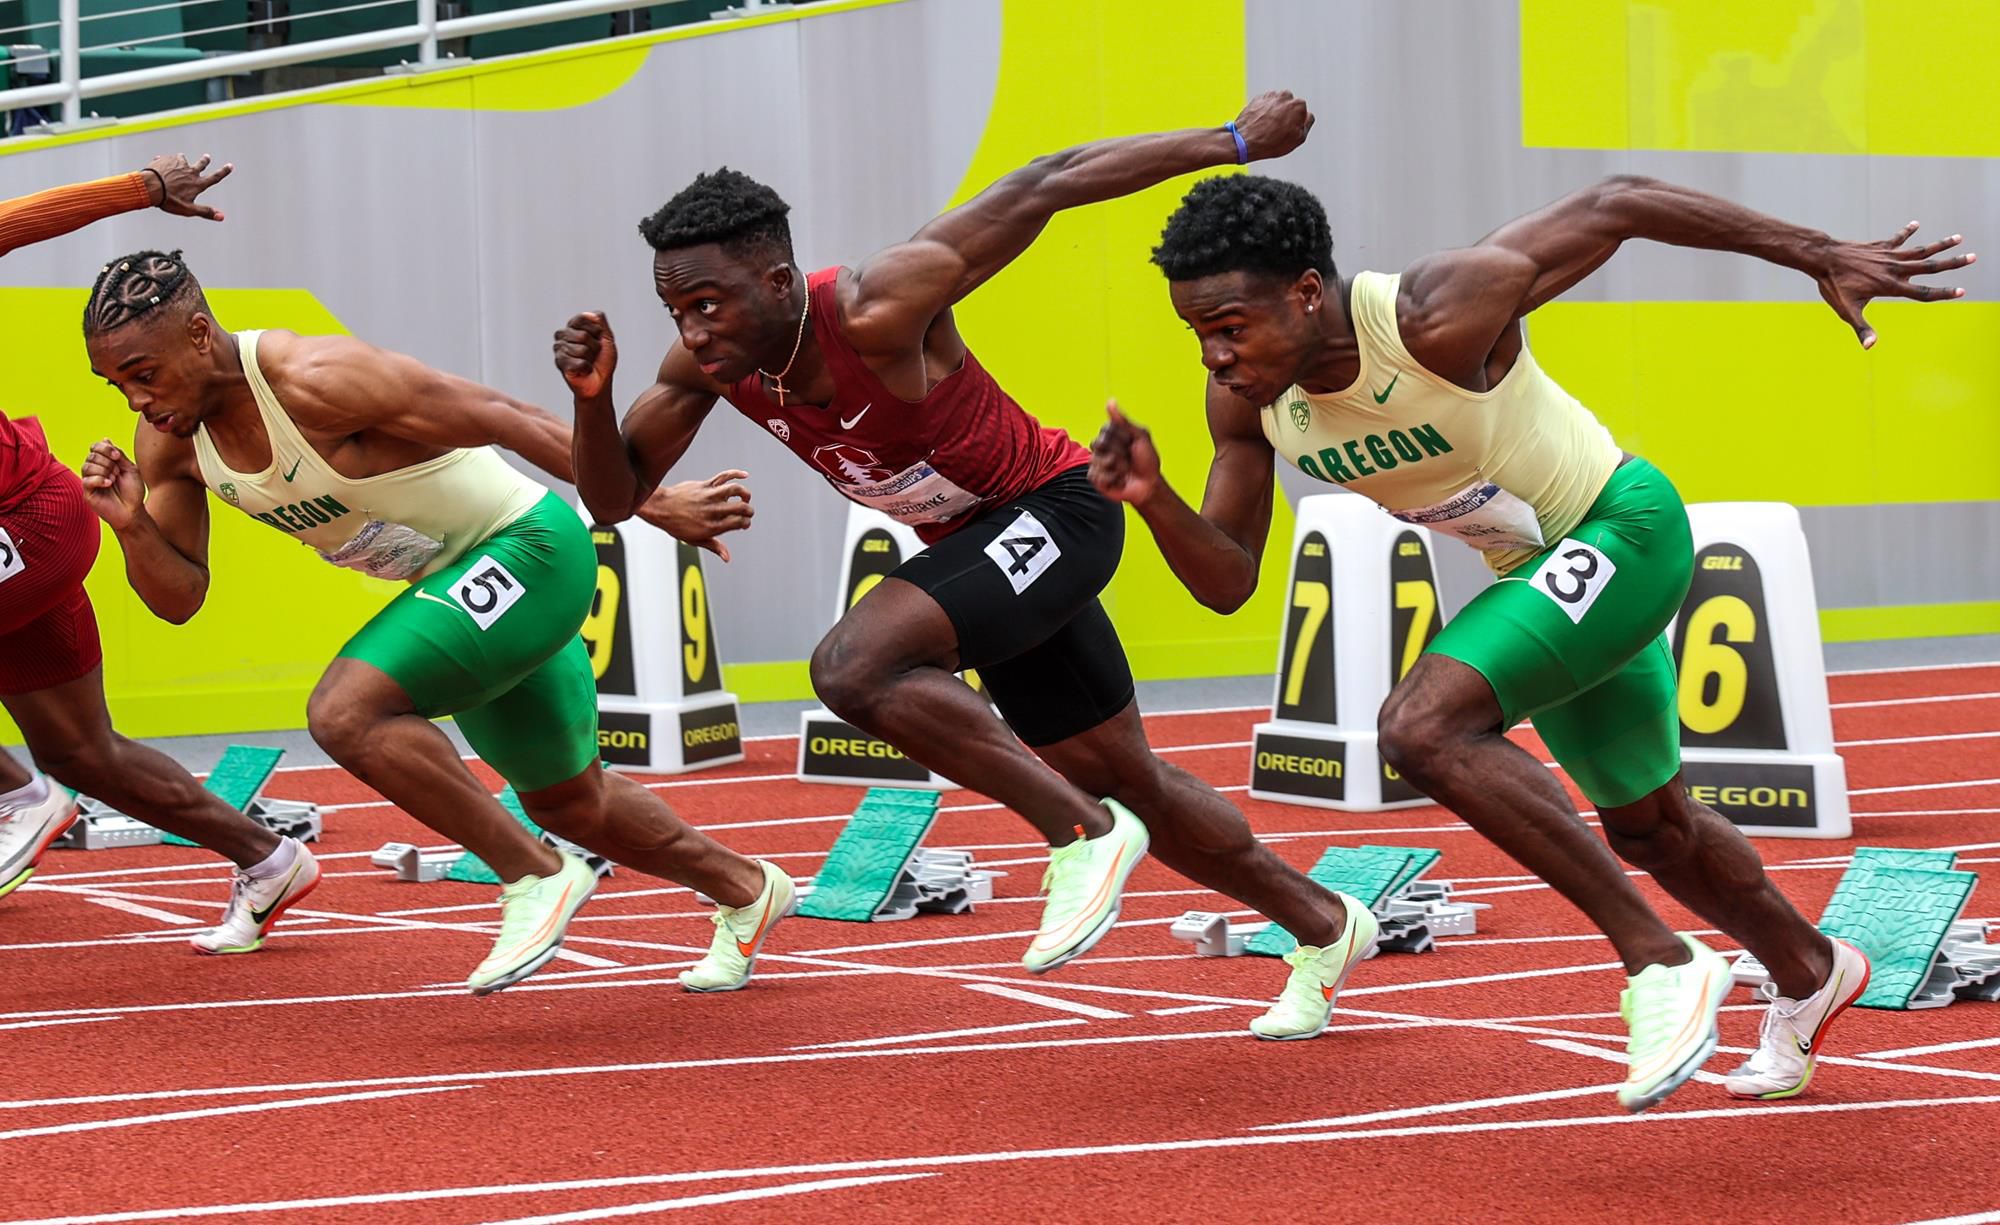 Onwuzurike races to the fastest time by a Nigerian athlete in 2023